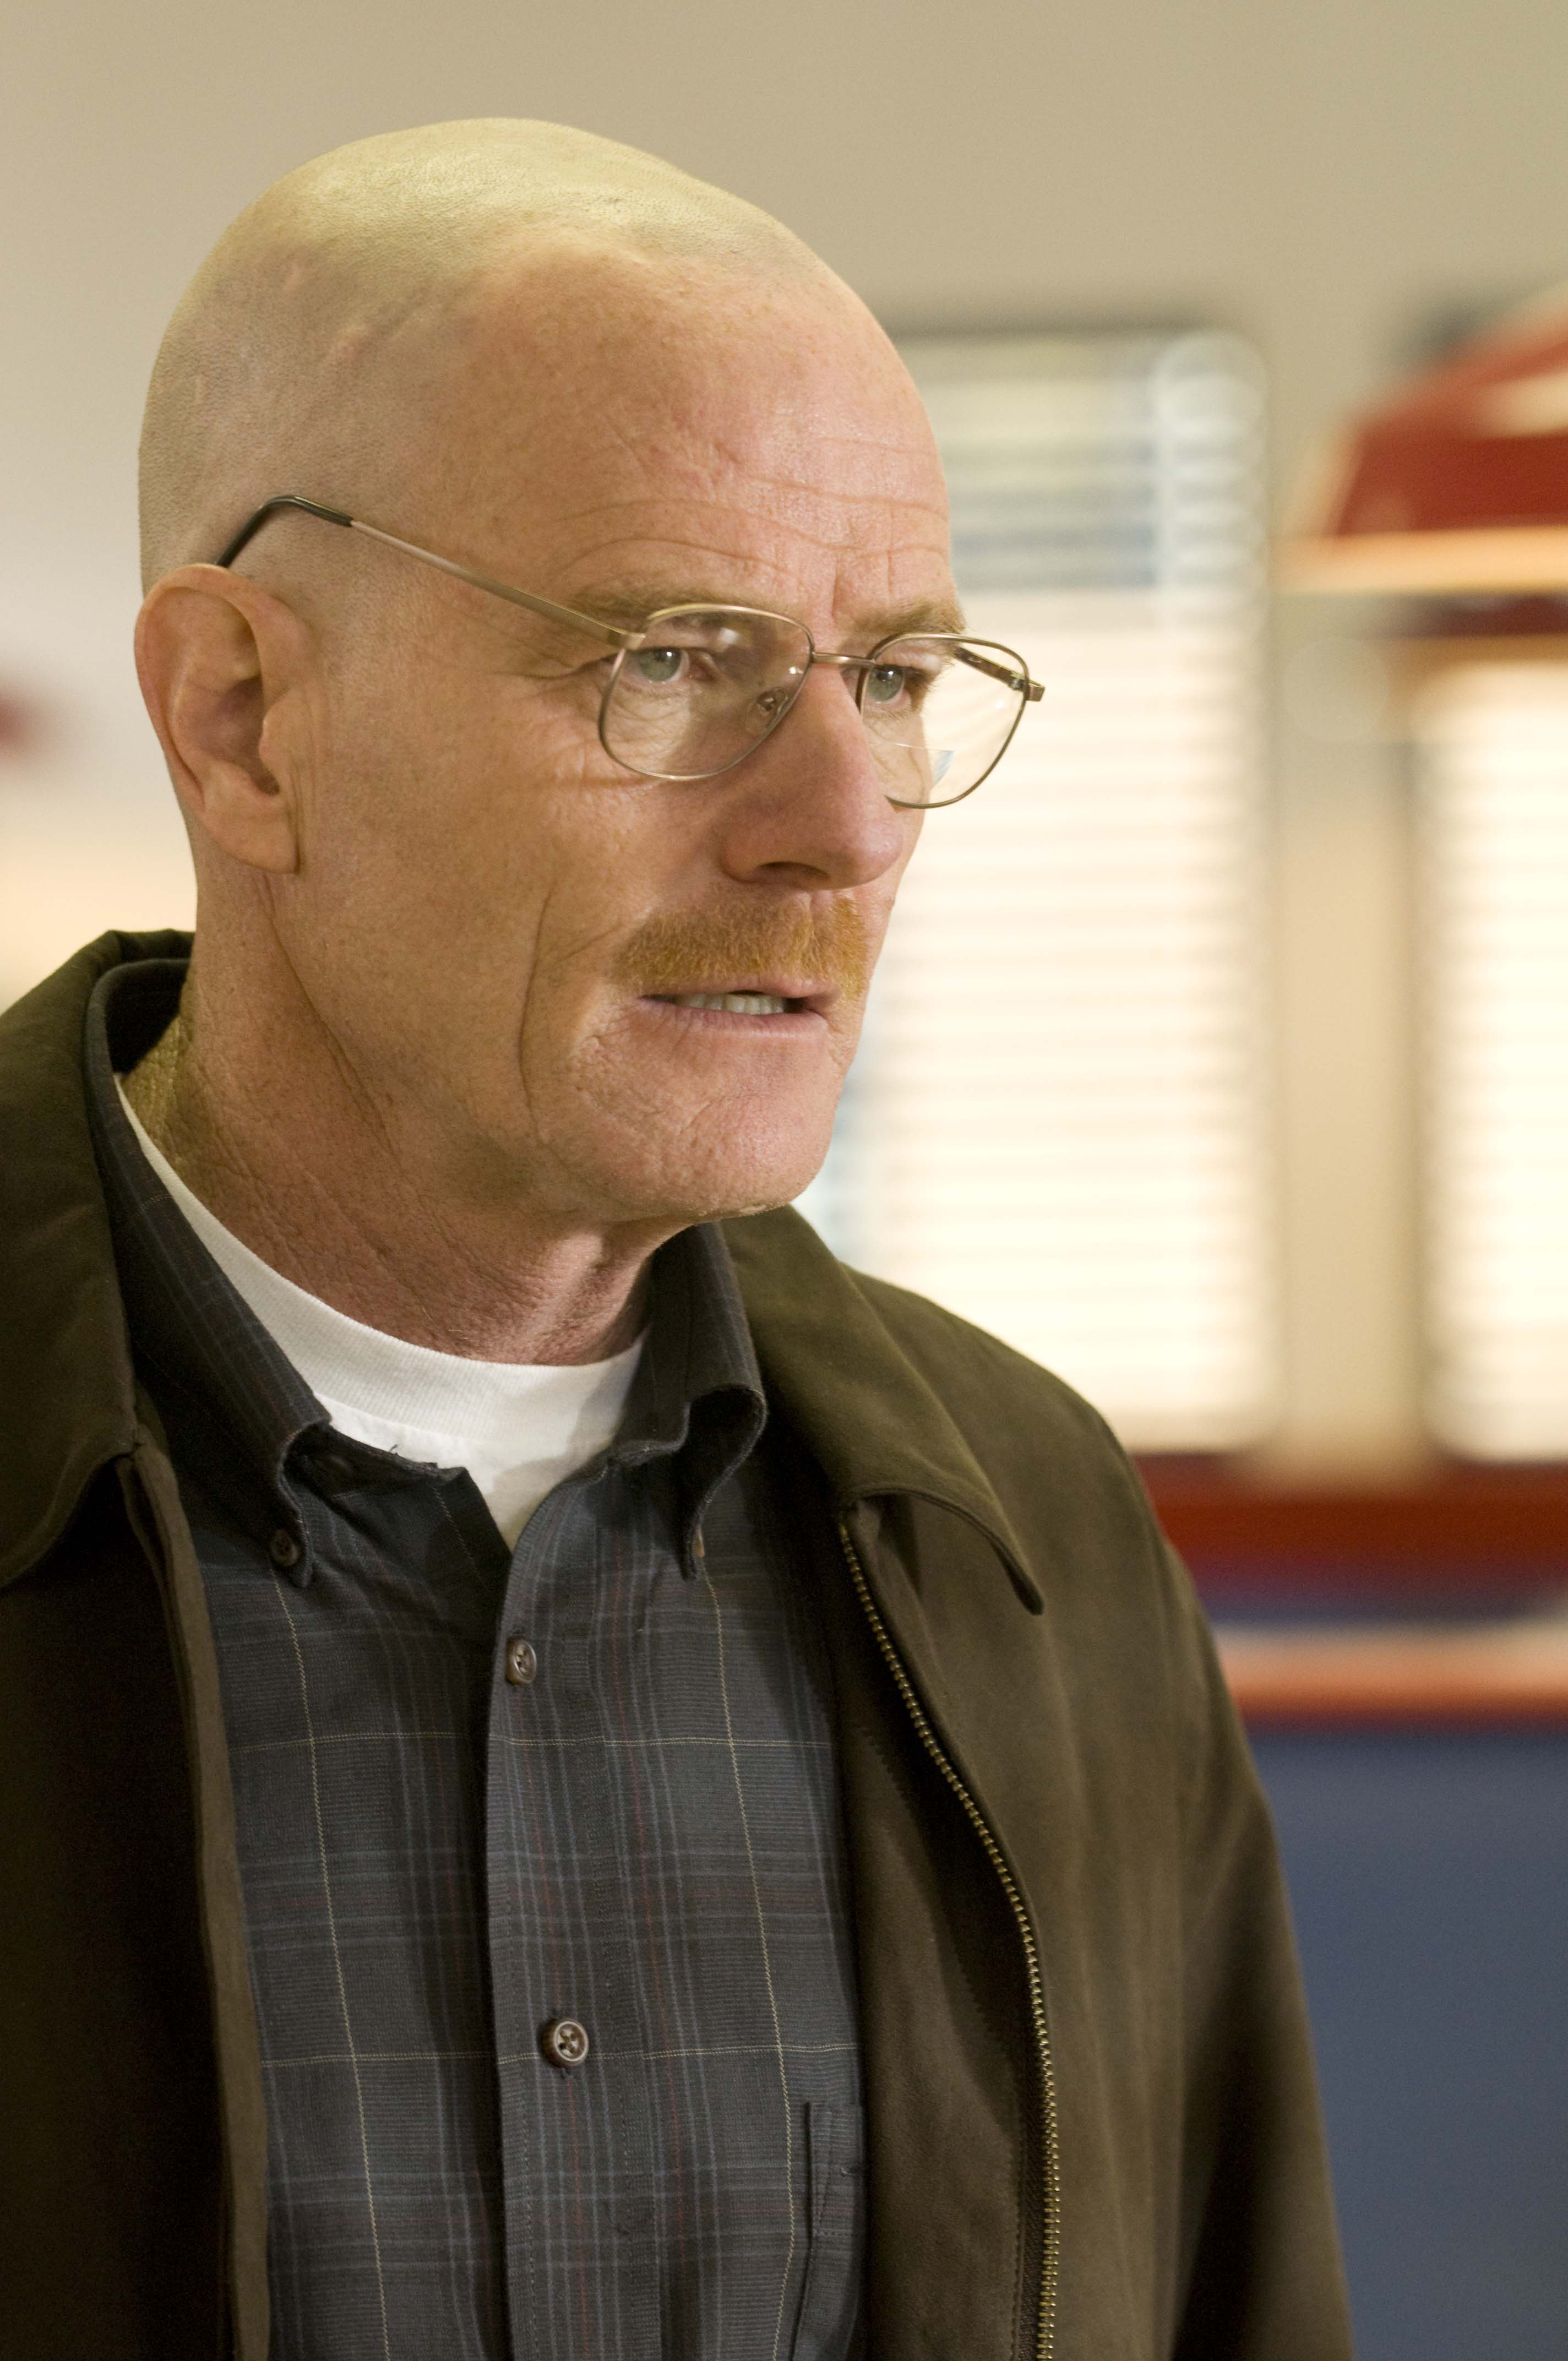 Bryan Cranston Breaking Bad Season Still Episode Malcolm In The Middle Gallery